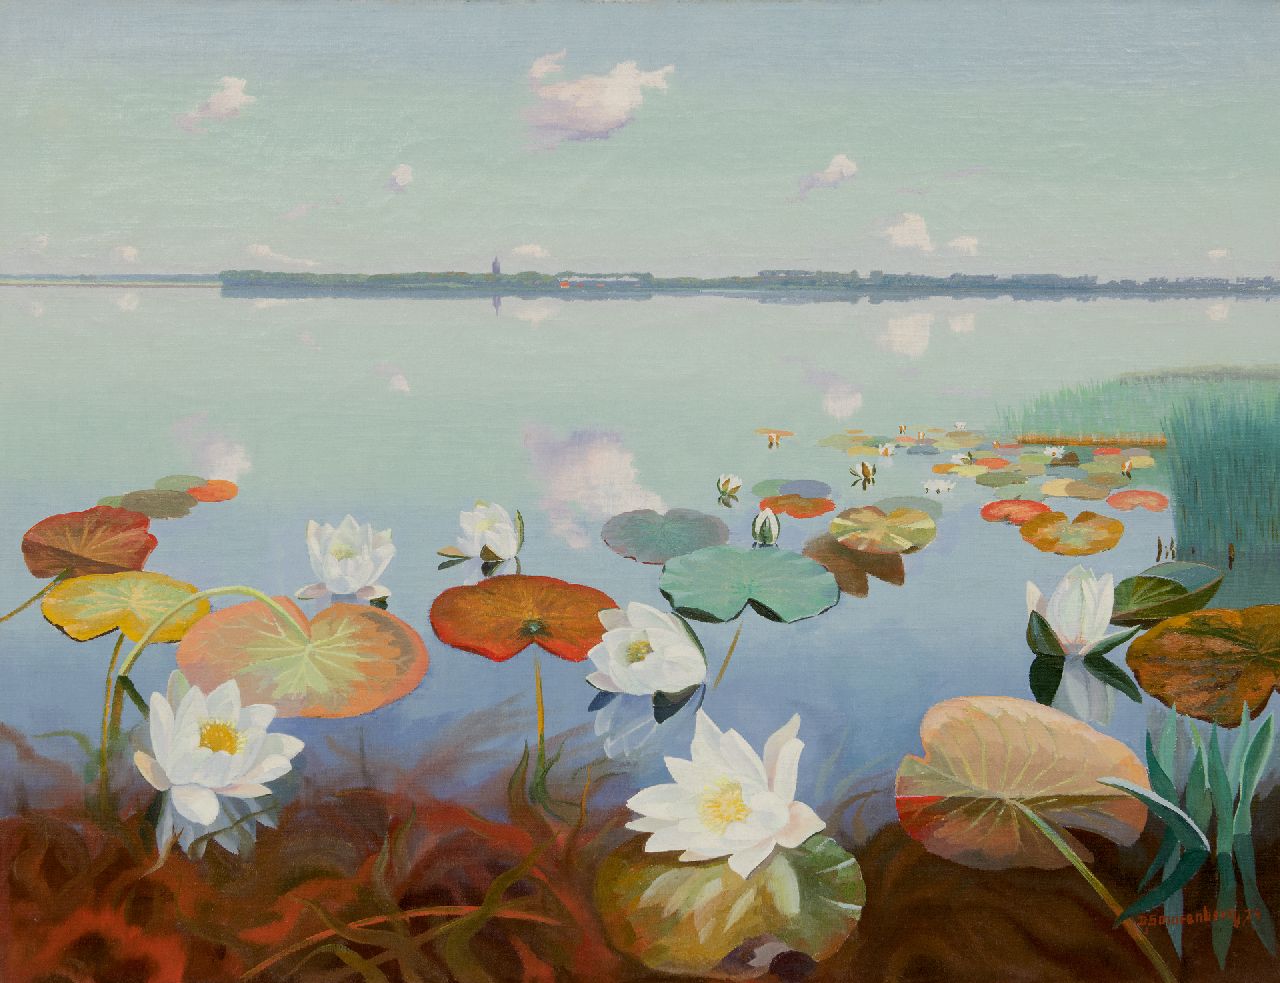 Smorenberg D.  | Dirk Smorenberg | Paintings offered for sale | Lake near Loosdrecht with water lilies, oil on canvas 70.2 x 89.9 cm, signed l.r. and dated '24